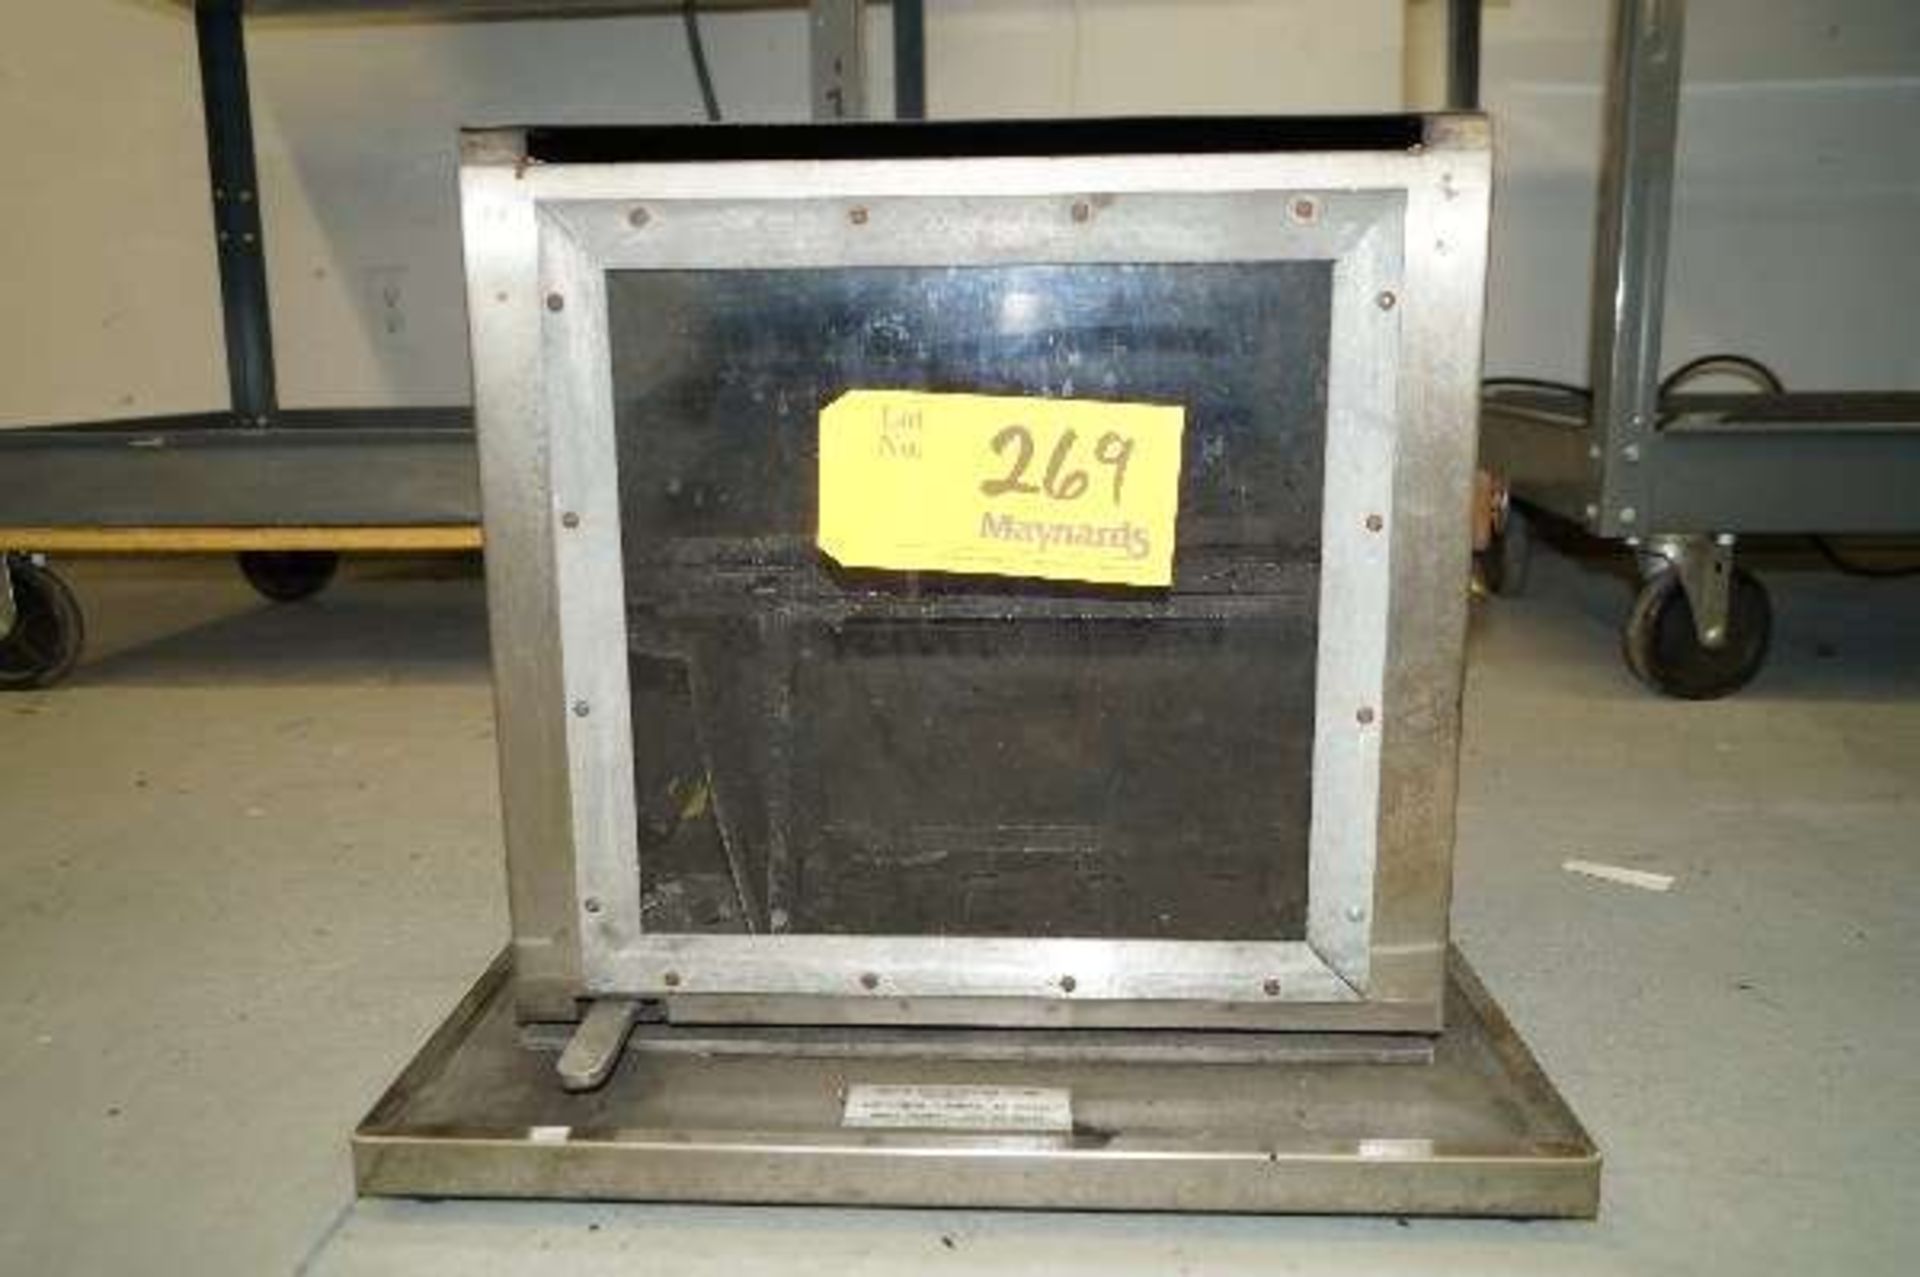 United States Testing Co. 7636A Horizontal Flammability Tester